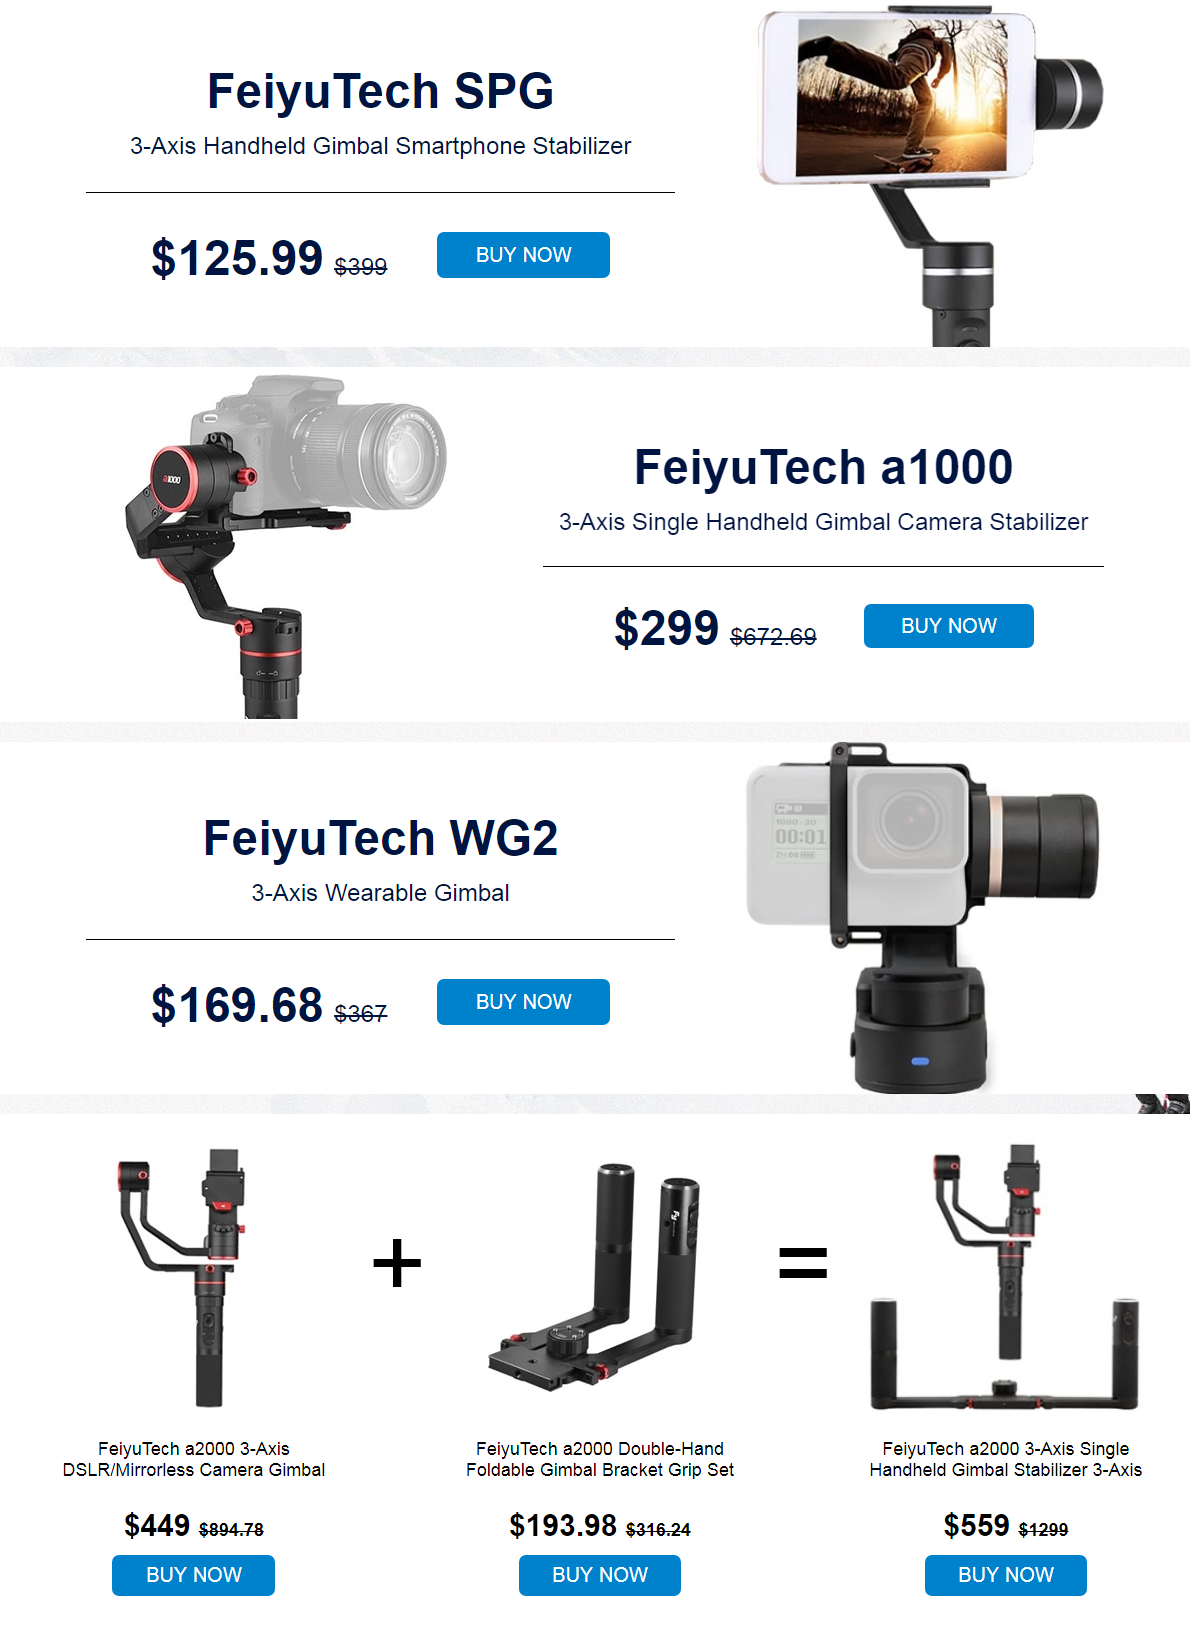 FeiyuTech Products with Promotional Sale, Save Up to $740